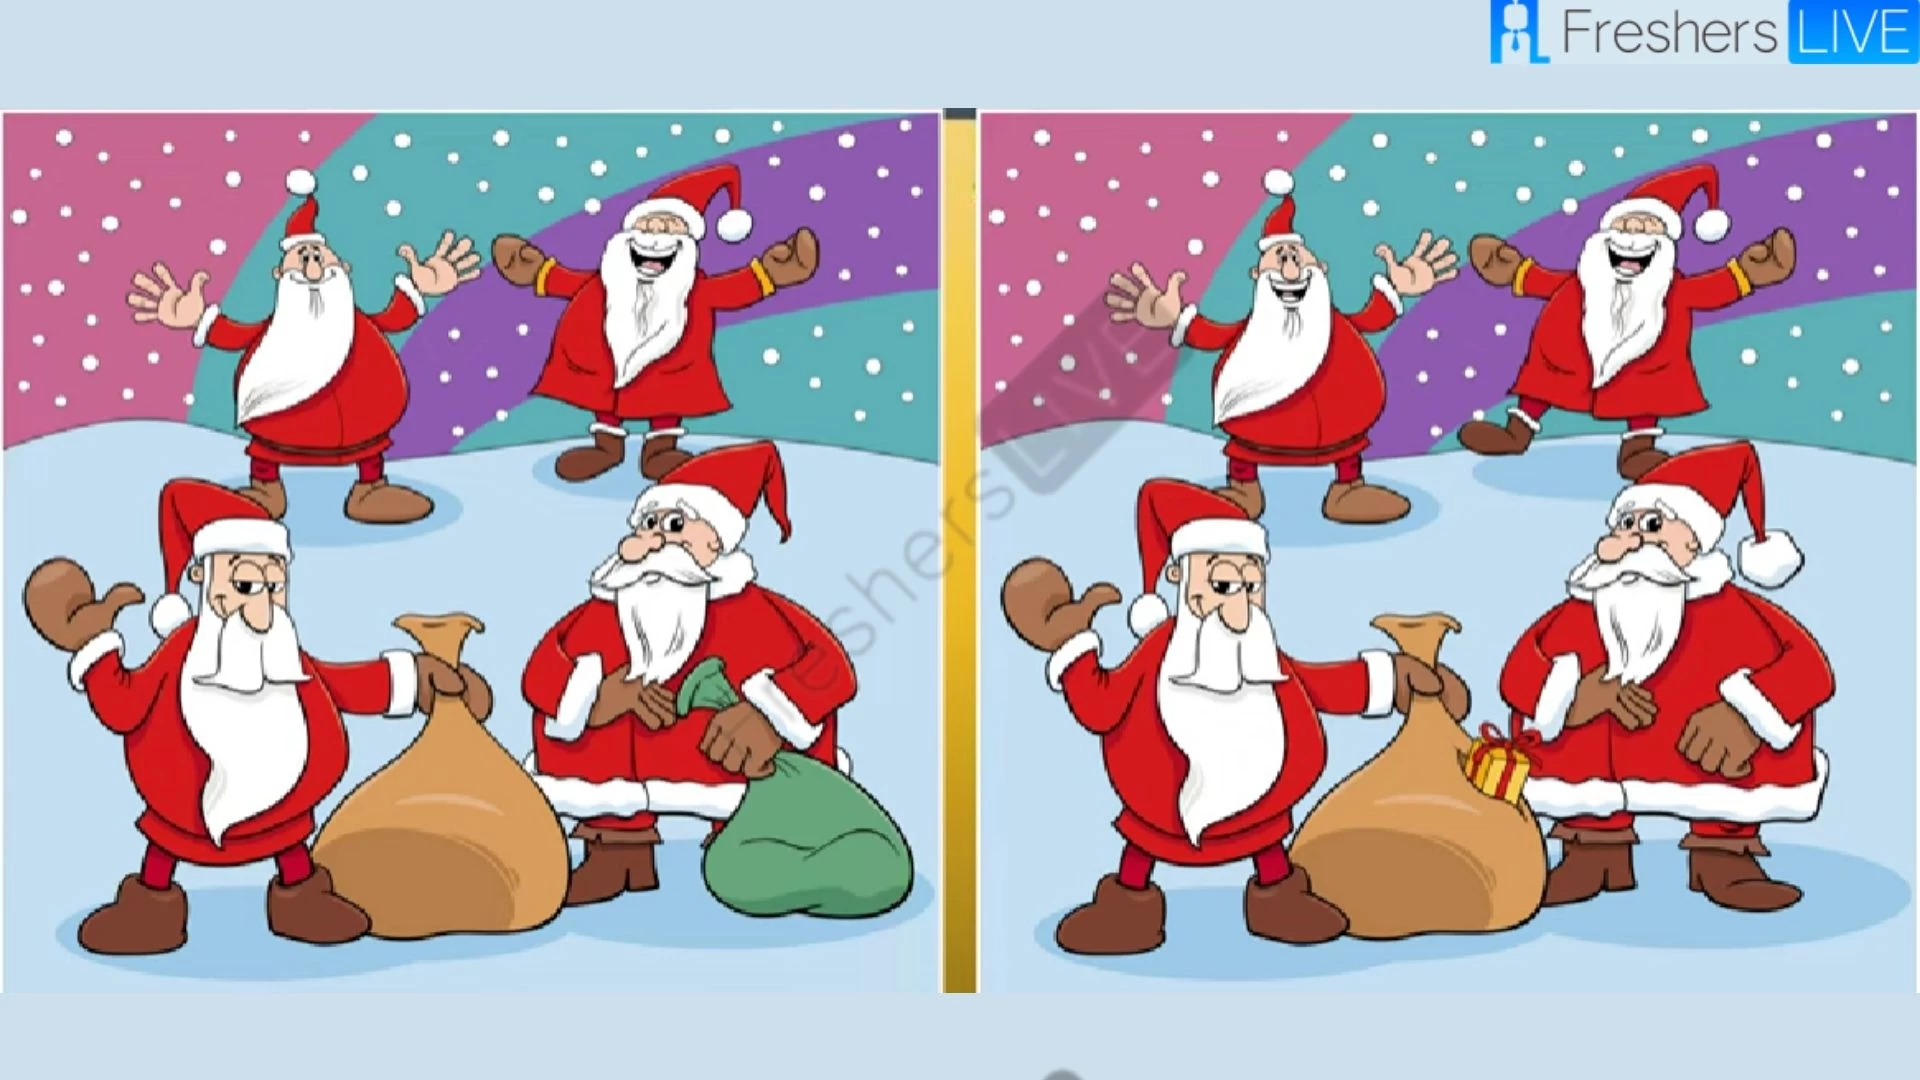 How perceptive are you?  Spot 5 differences in the pictures of Santa Claus within 18 seconds